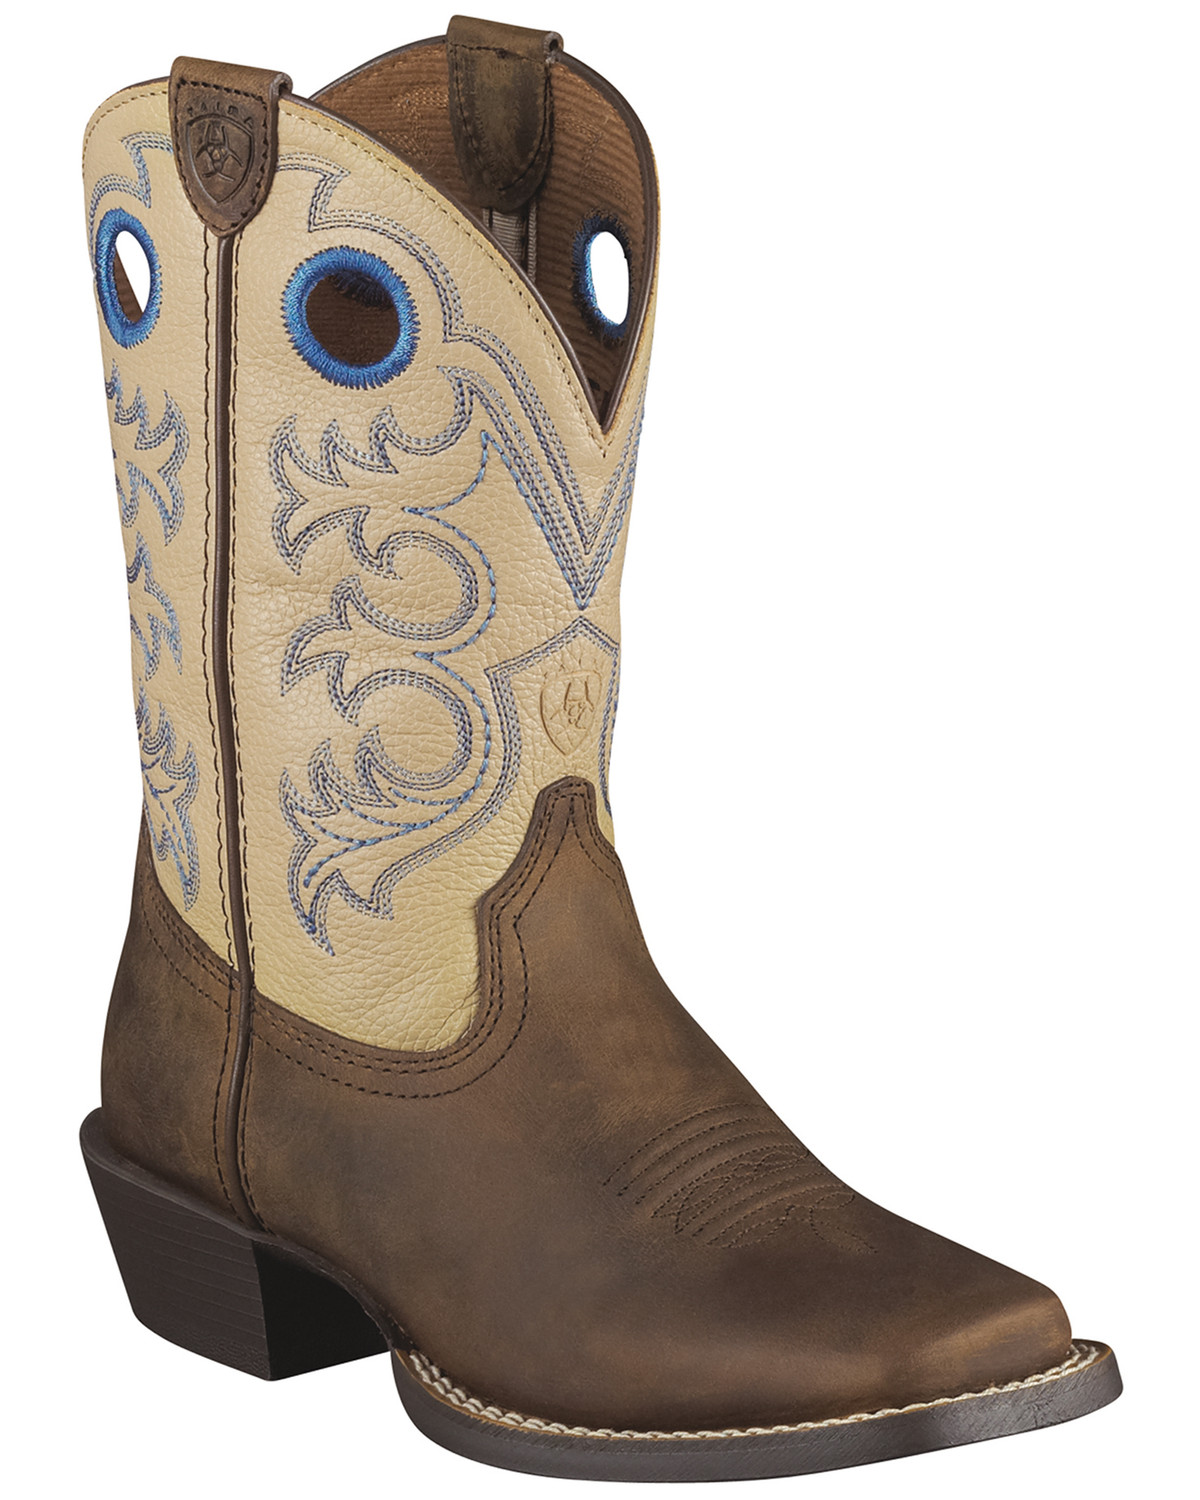 Ariat Youth Boys' Crossfire Cowboy Boots - Square Toe | Sheplers